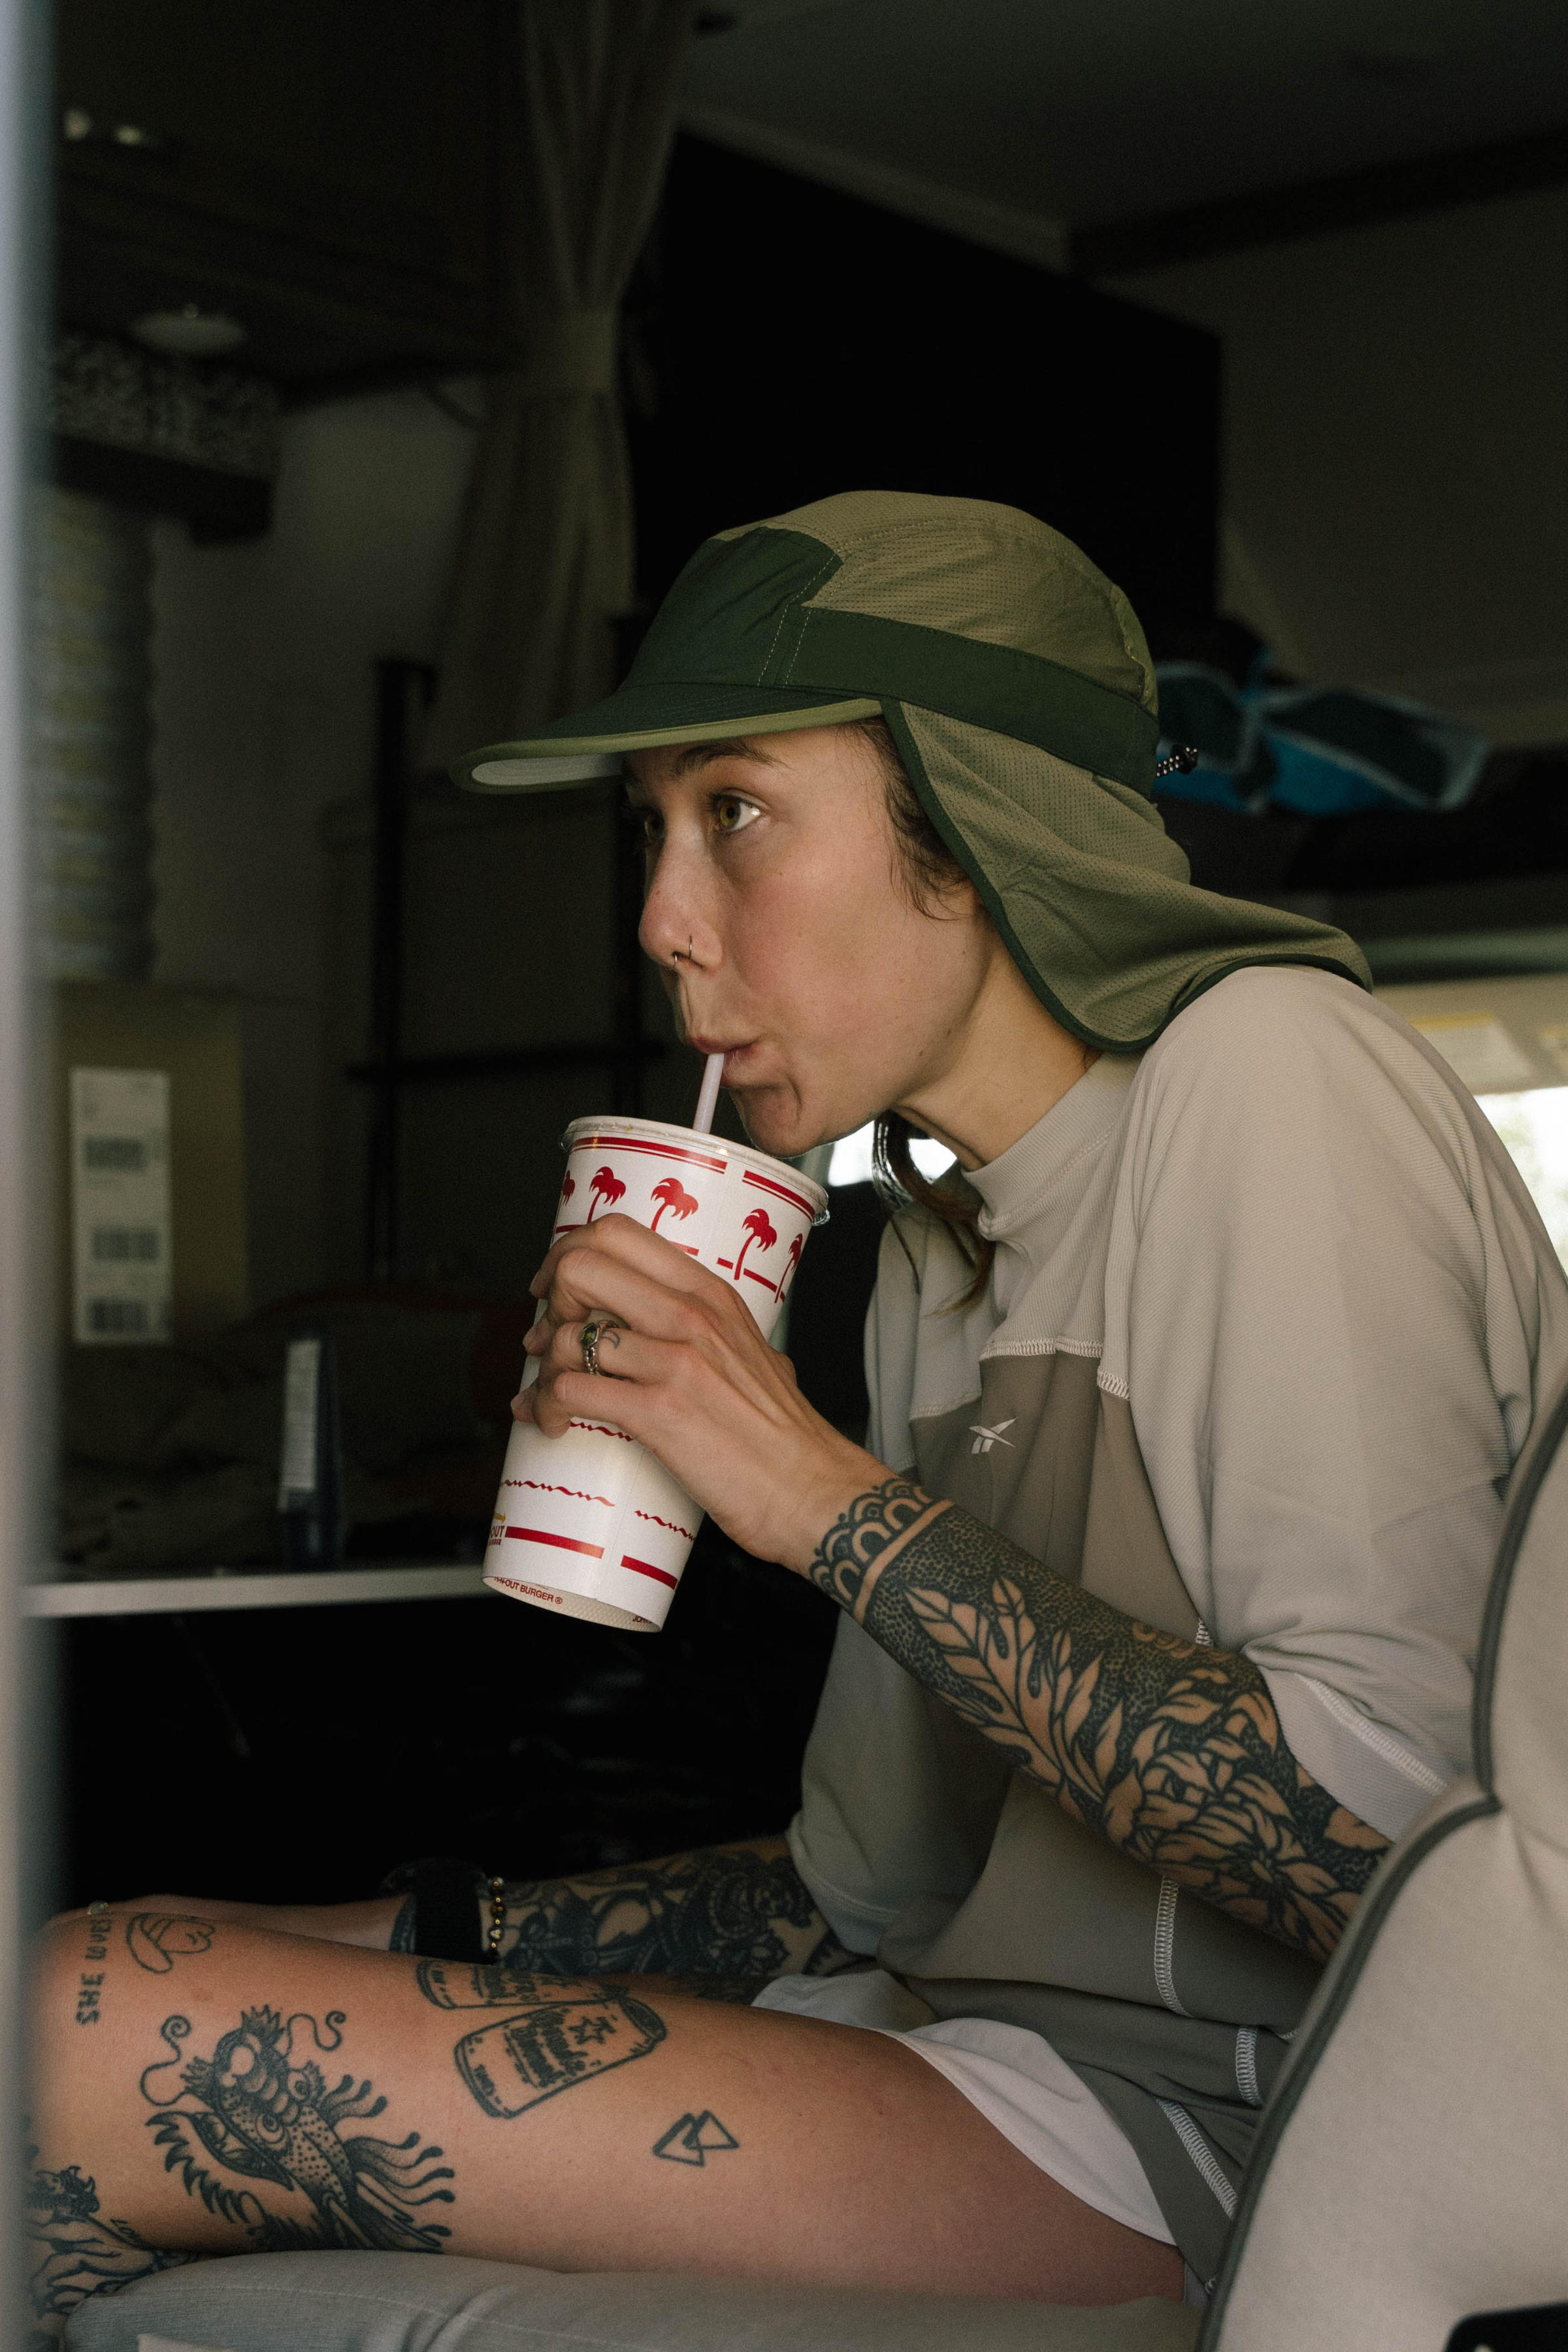 Close-up of athlete drinking from a straw in a van